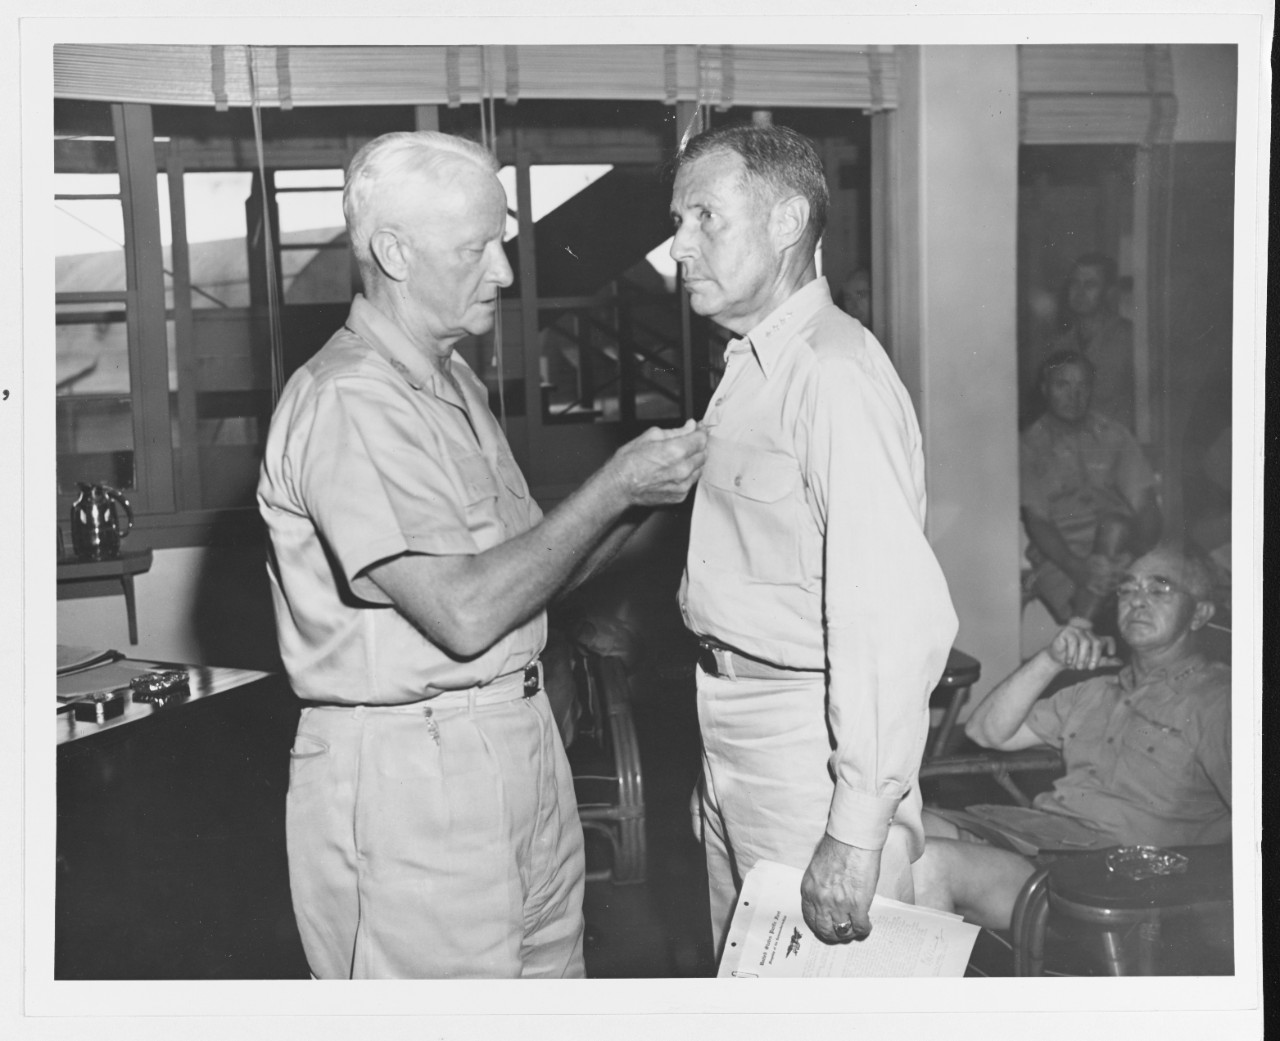 Admiral Raymond Spruance receives the Navy Cross from Fleet Admiral Chester Nimitz, at Pacific Fleet Headquarters, Guam, 1 June 1945. At right is Admiral Richmond K. Turner in hallway, at right in distance is Rear Admiral Forrest Sherman